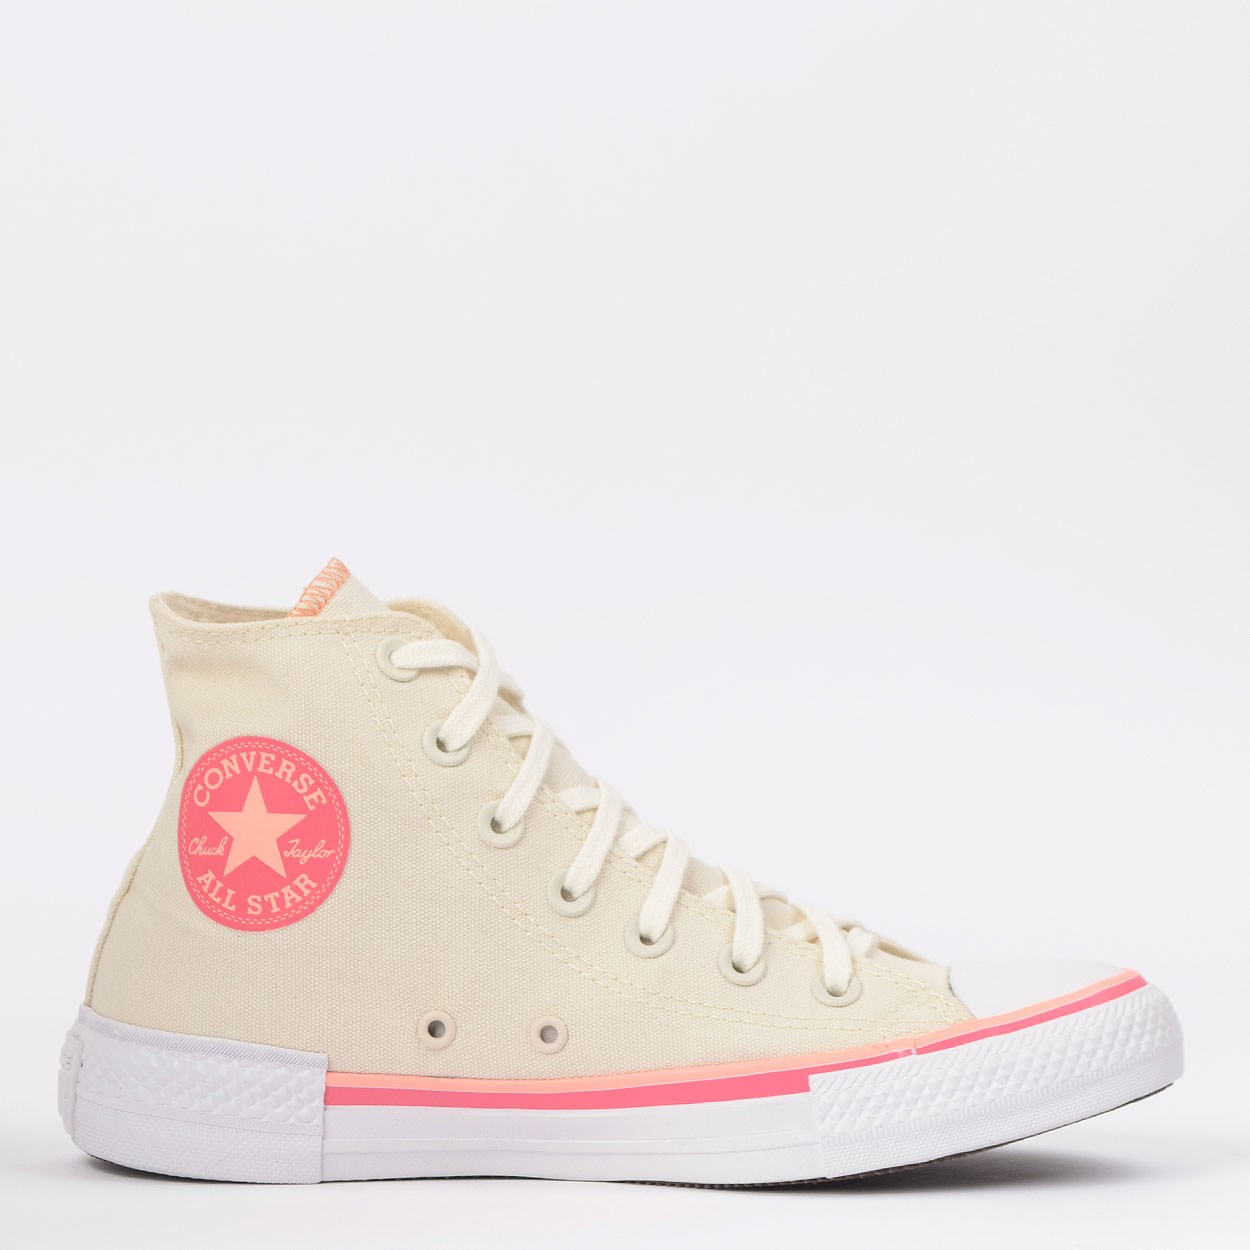 tenis all star chuck taylor bege